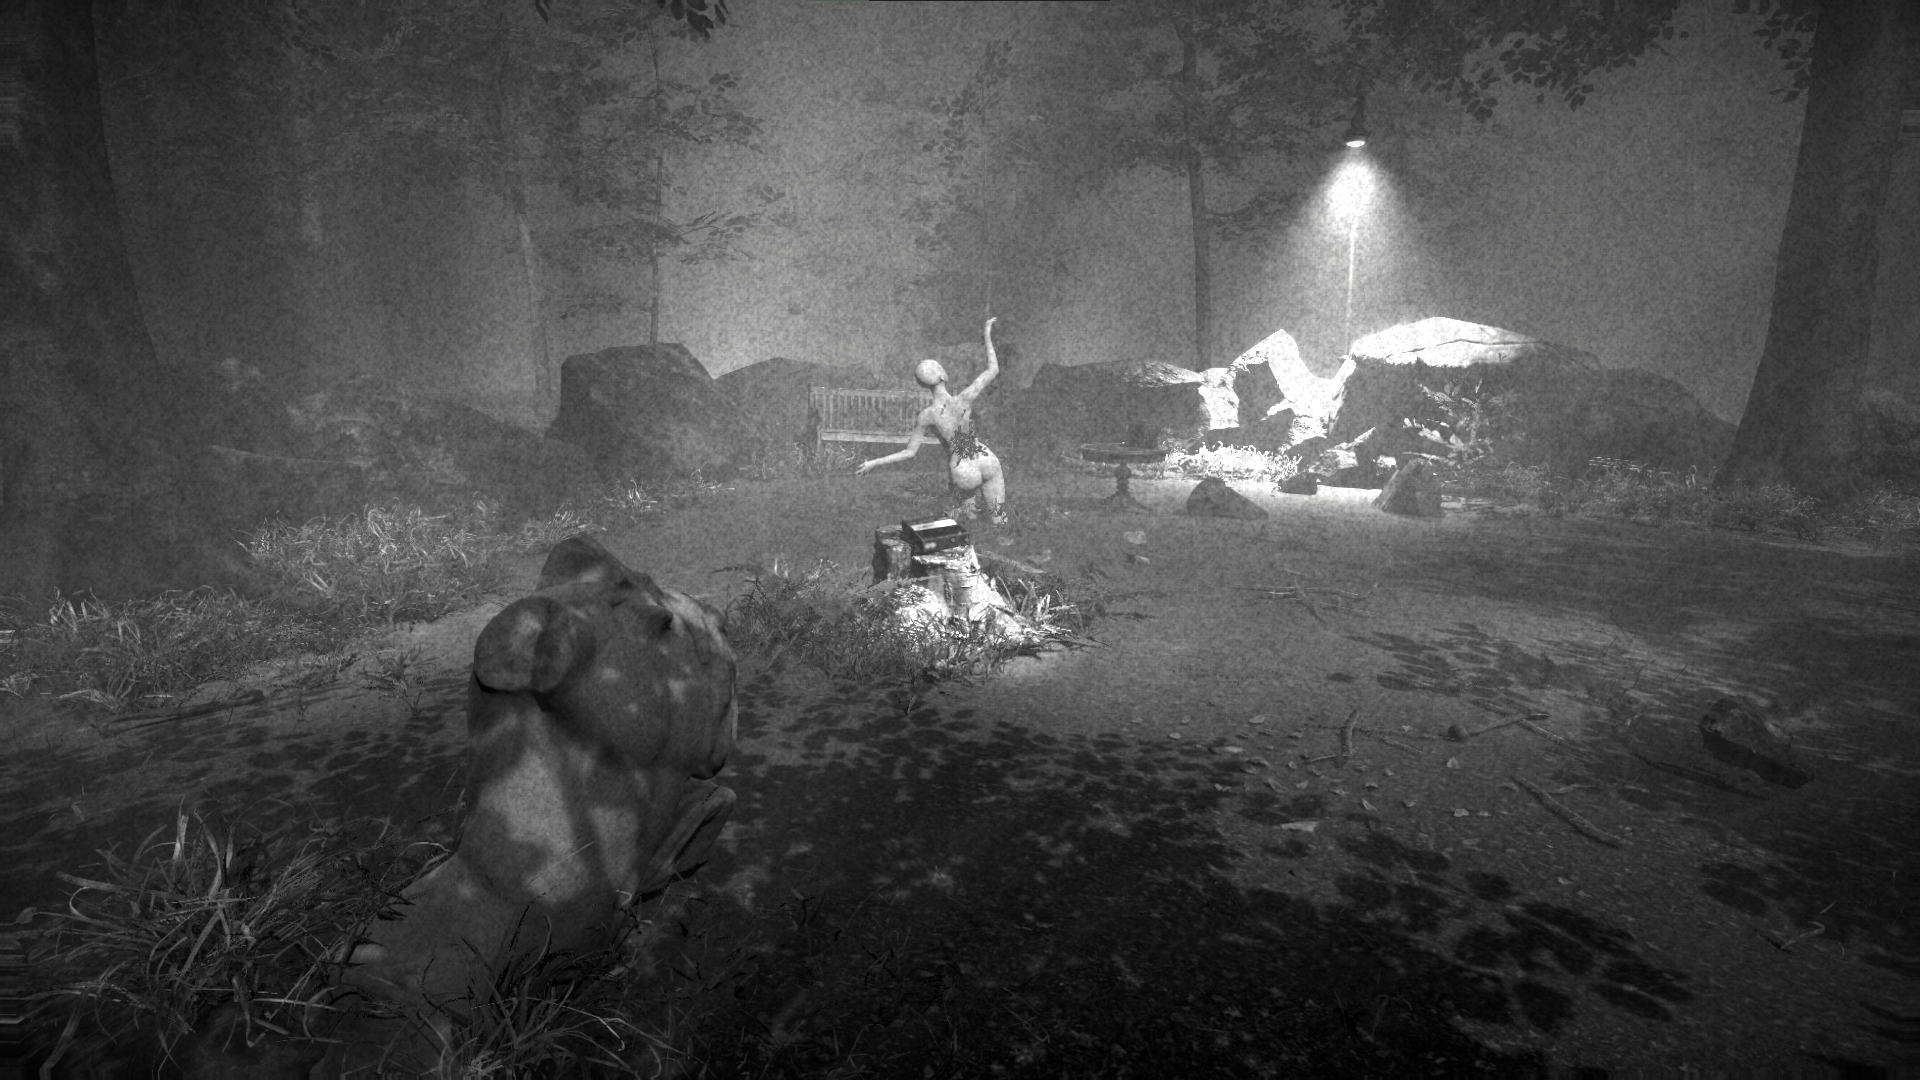 The Colossus is Coming 2 - a black & white clearing with broken branches and old statues